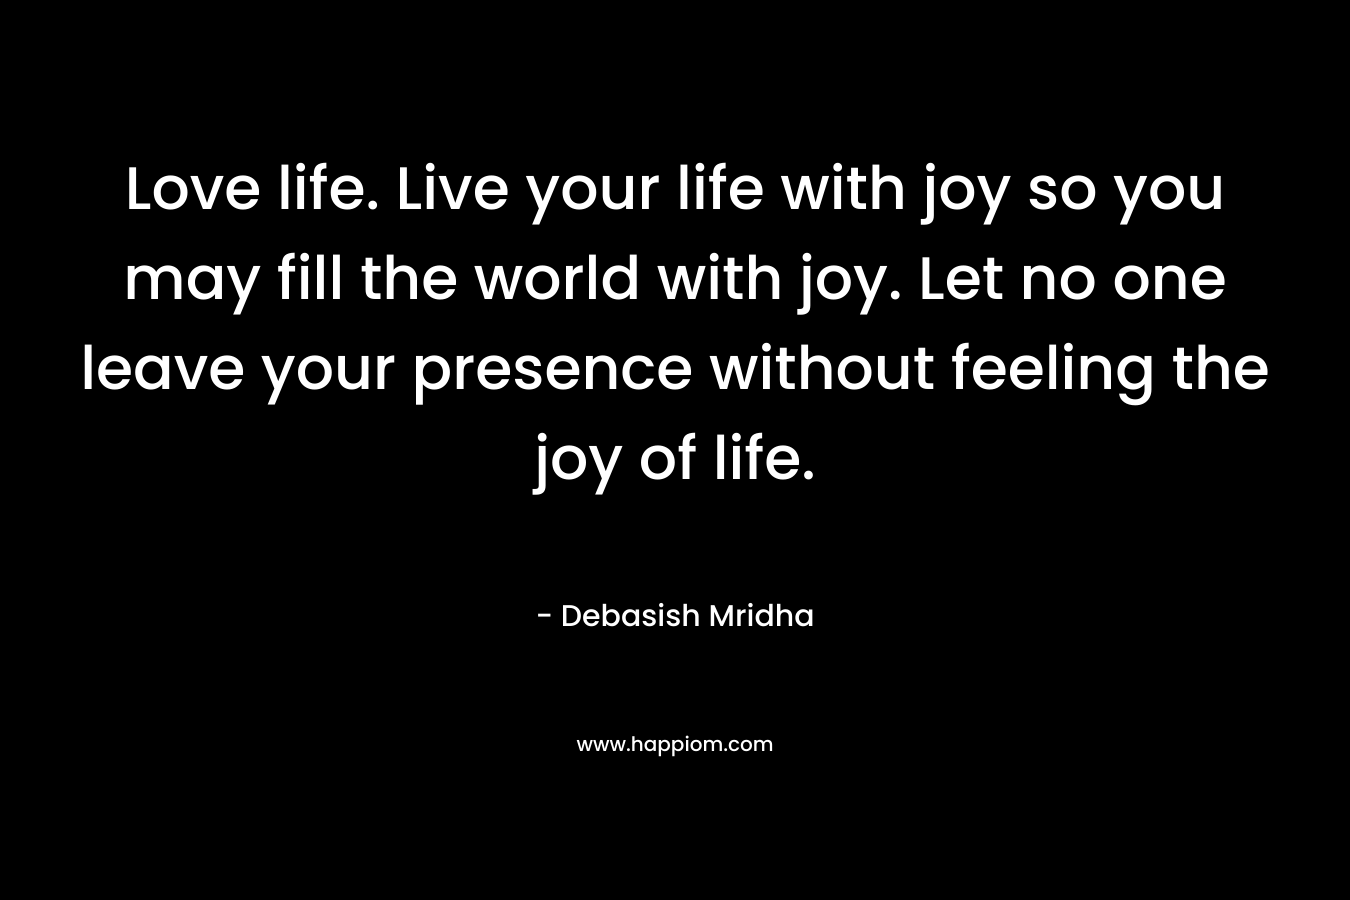 Love life. Live your life with joy so you may fill the world with joy. Let no one leave your presence without feeling the joy of life.